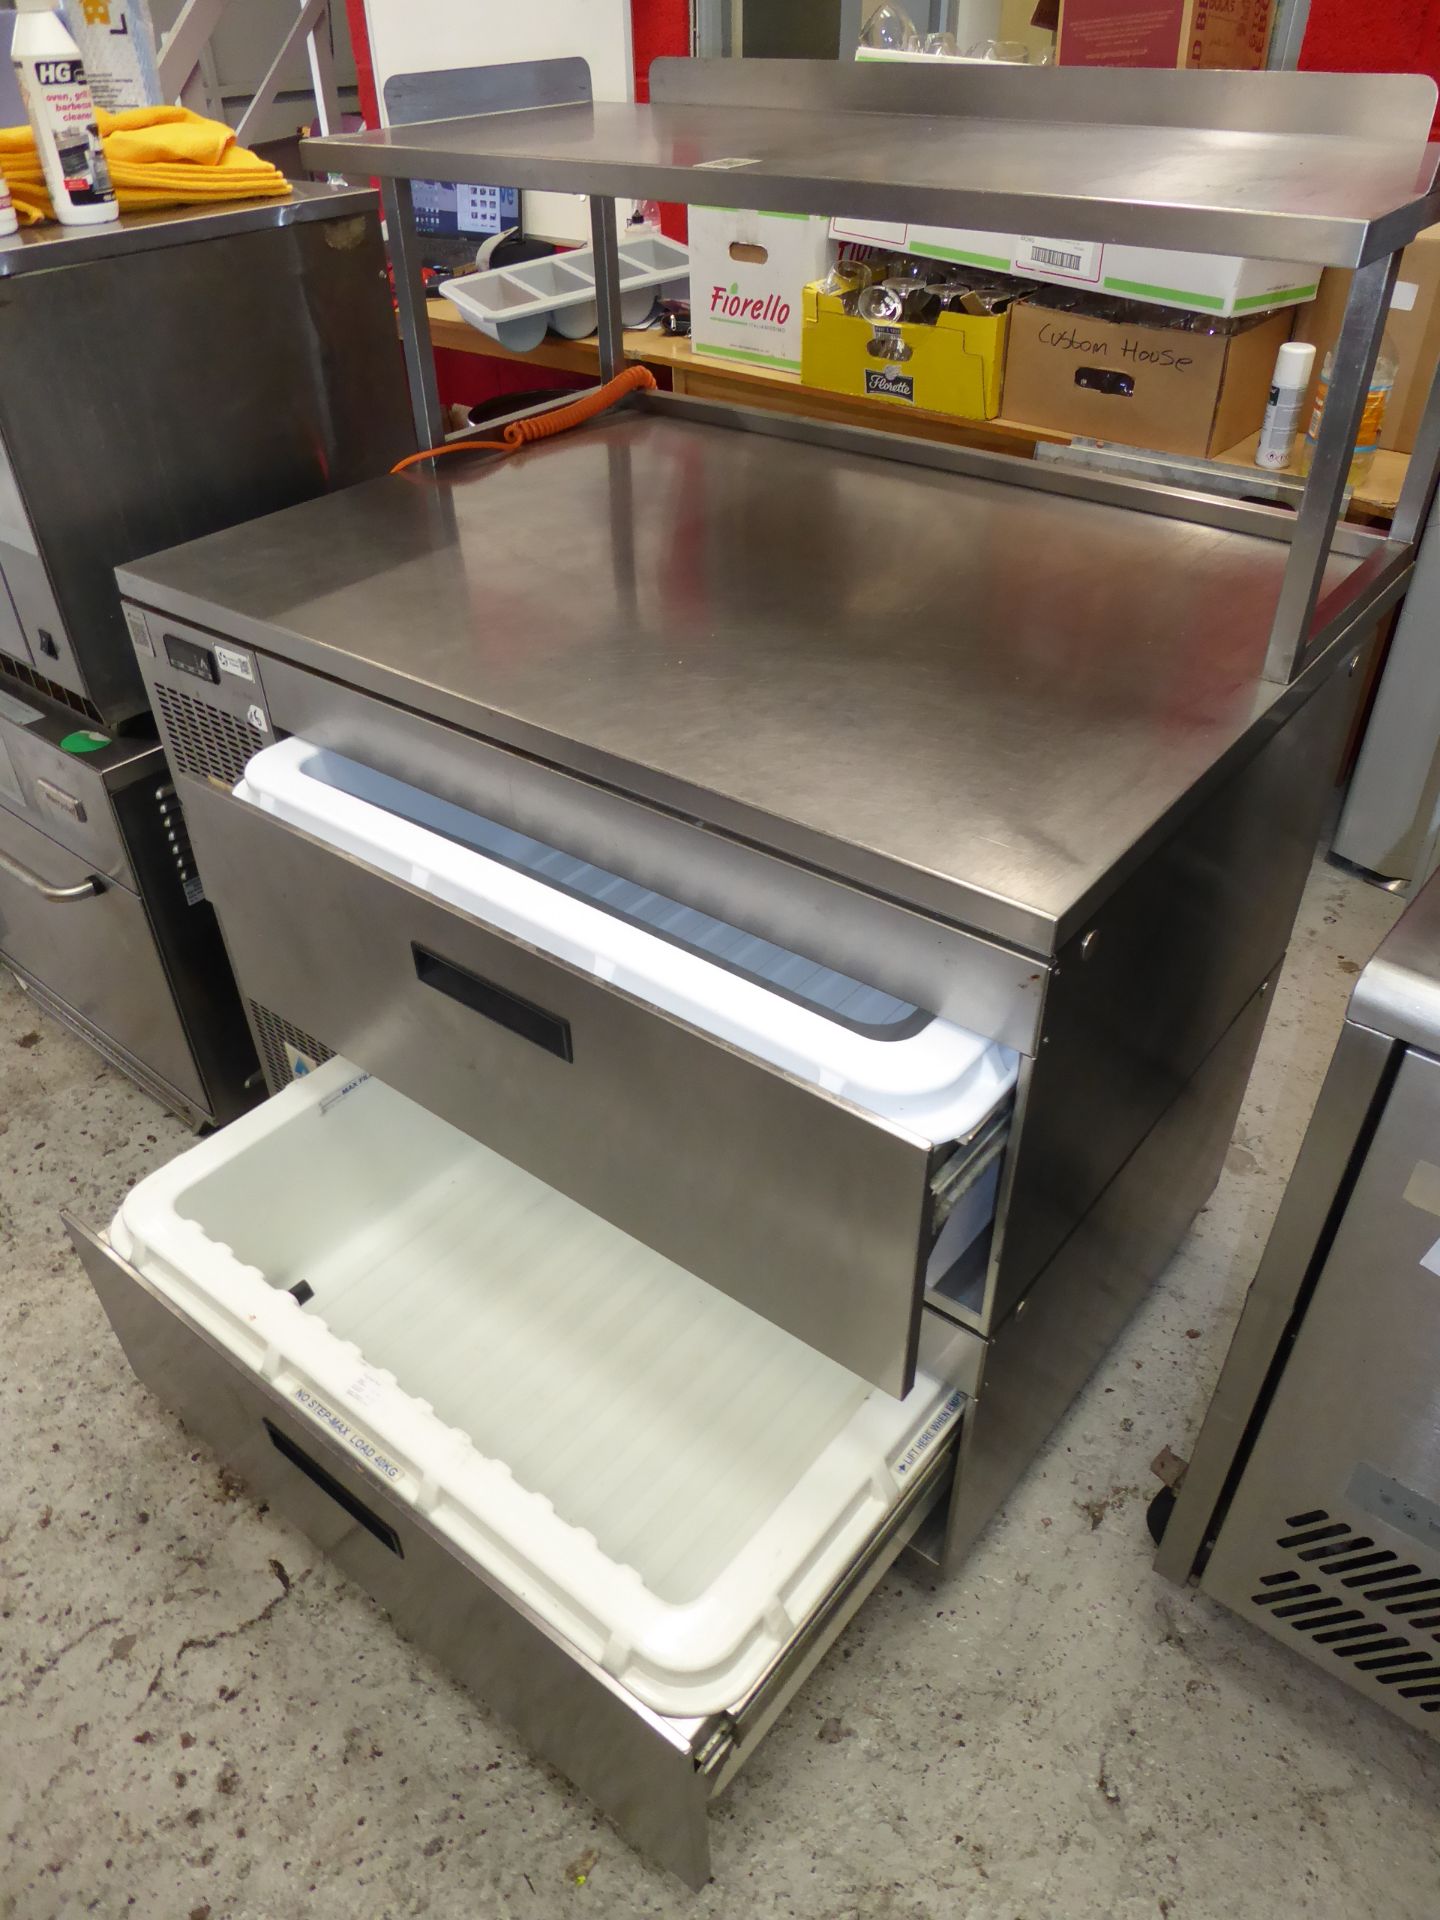 * Adande 2 drawer refrigerator, with additional shelf - direct from national chain. RRP new £4400 - Image 2 of 3